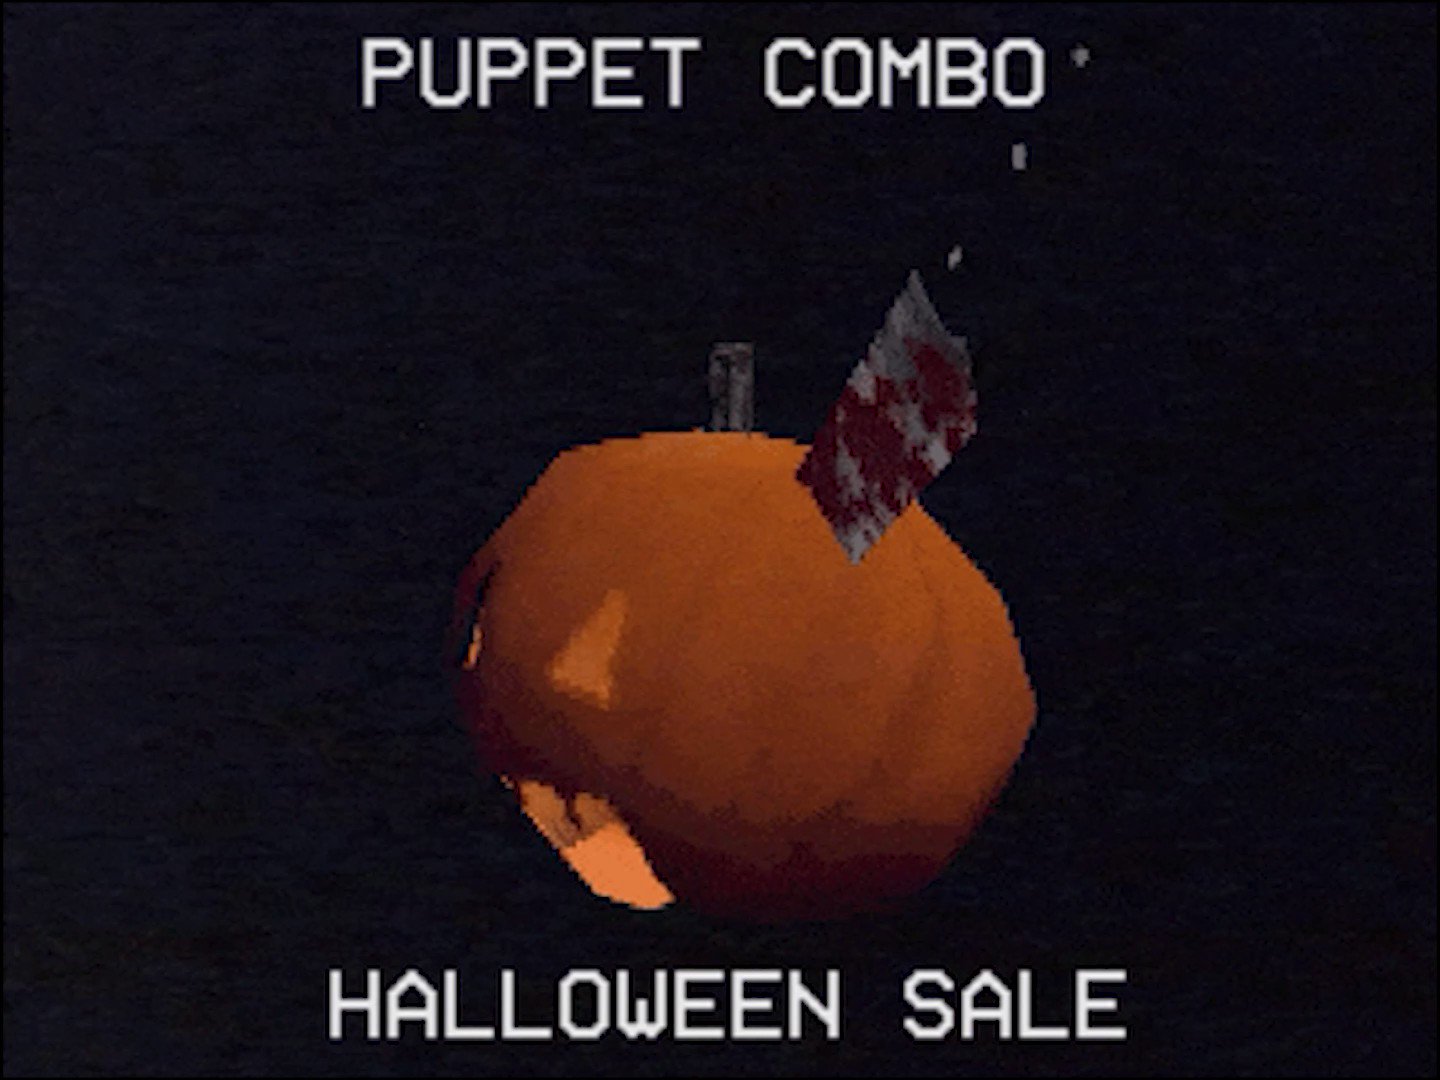 PUPPET COMBO 🎃 on X: The Steam Halloween Sale is on. Catch up on all Puppet  Combo and Torture Star Games Your library could look like this    / X